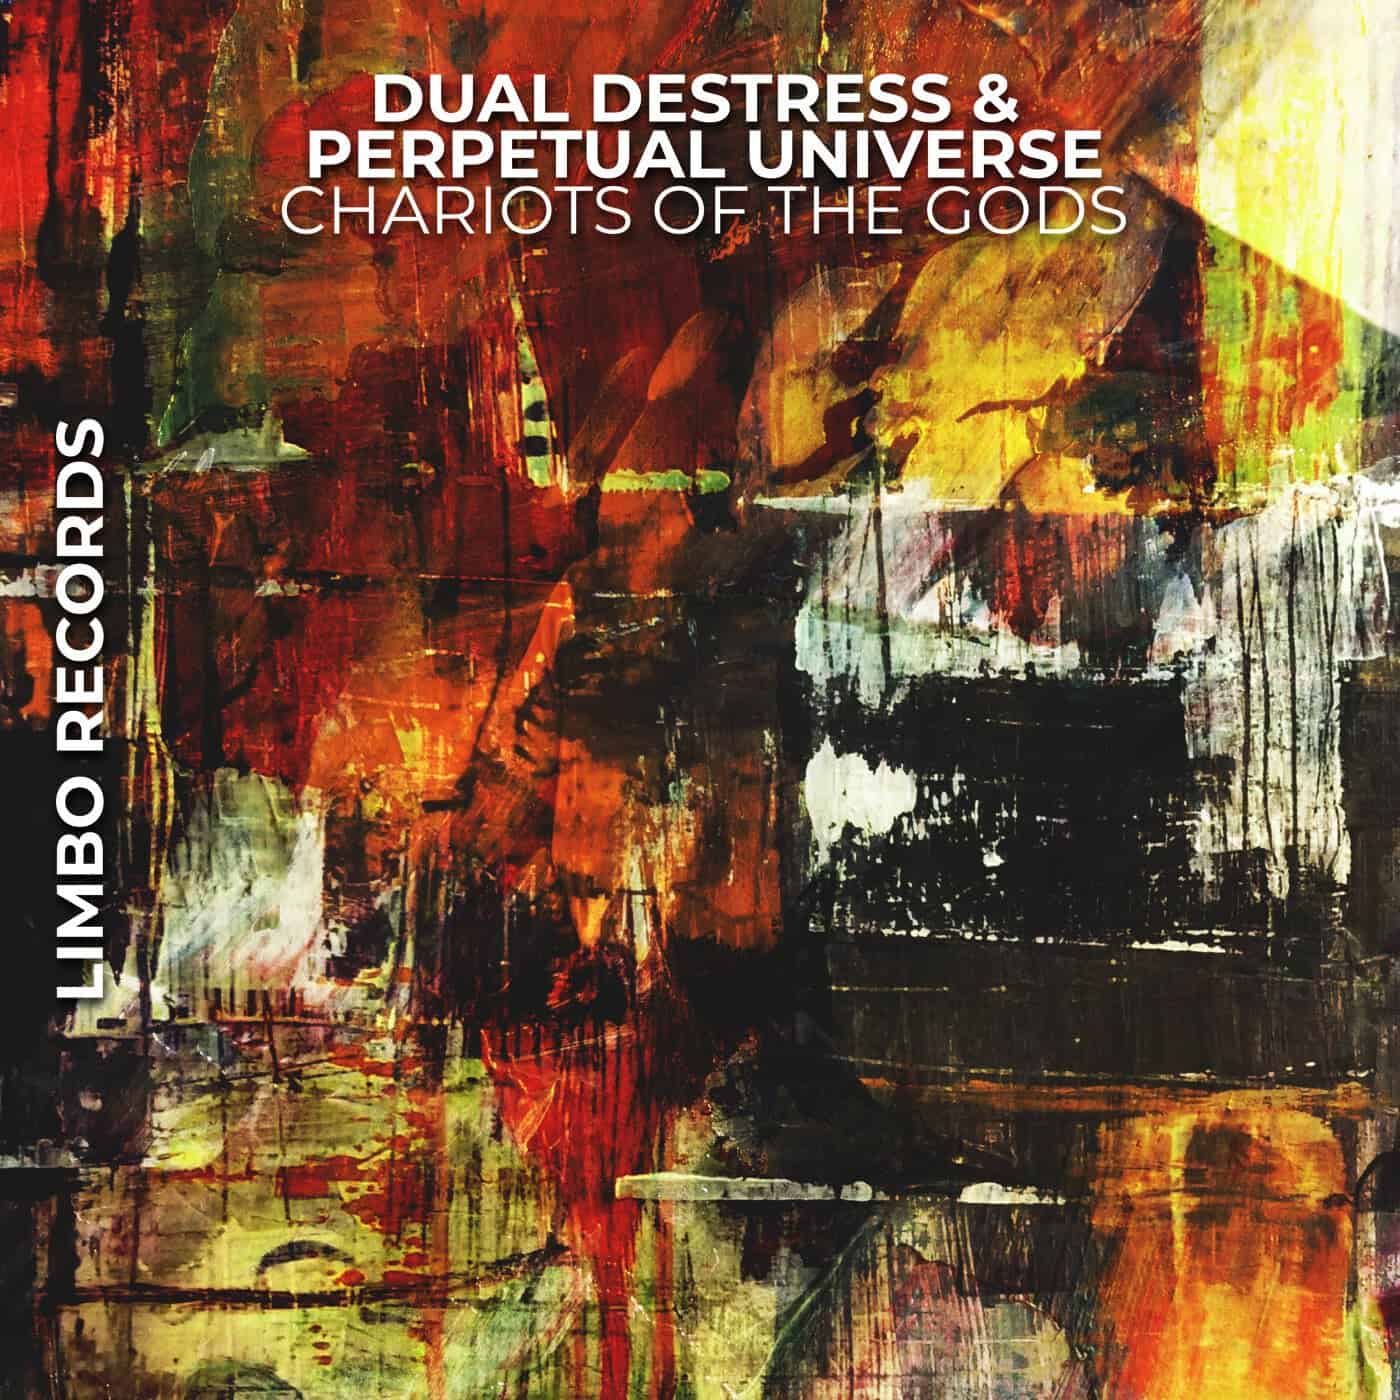 Download Perpetual Universe, Dual DeStress - Chariots of the Gods on Electrobuzz